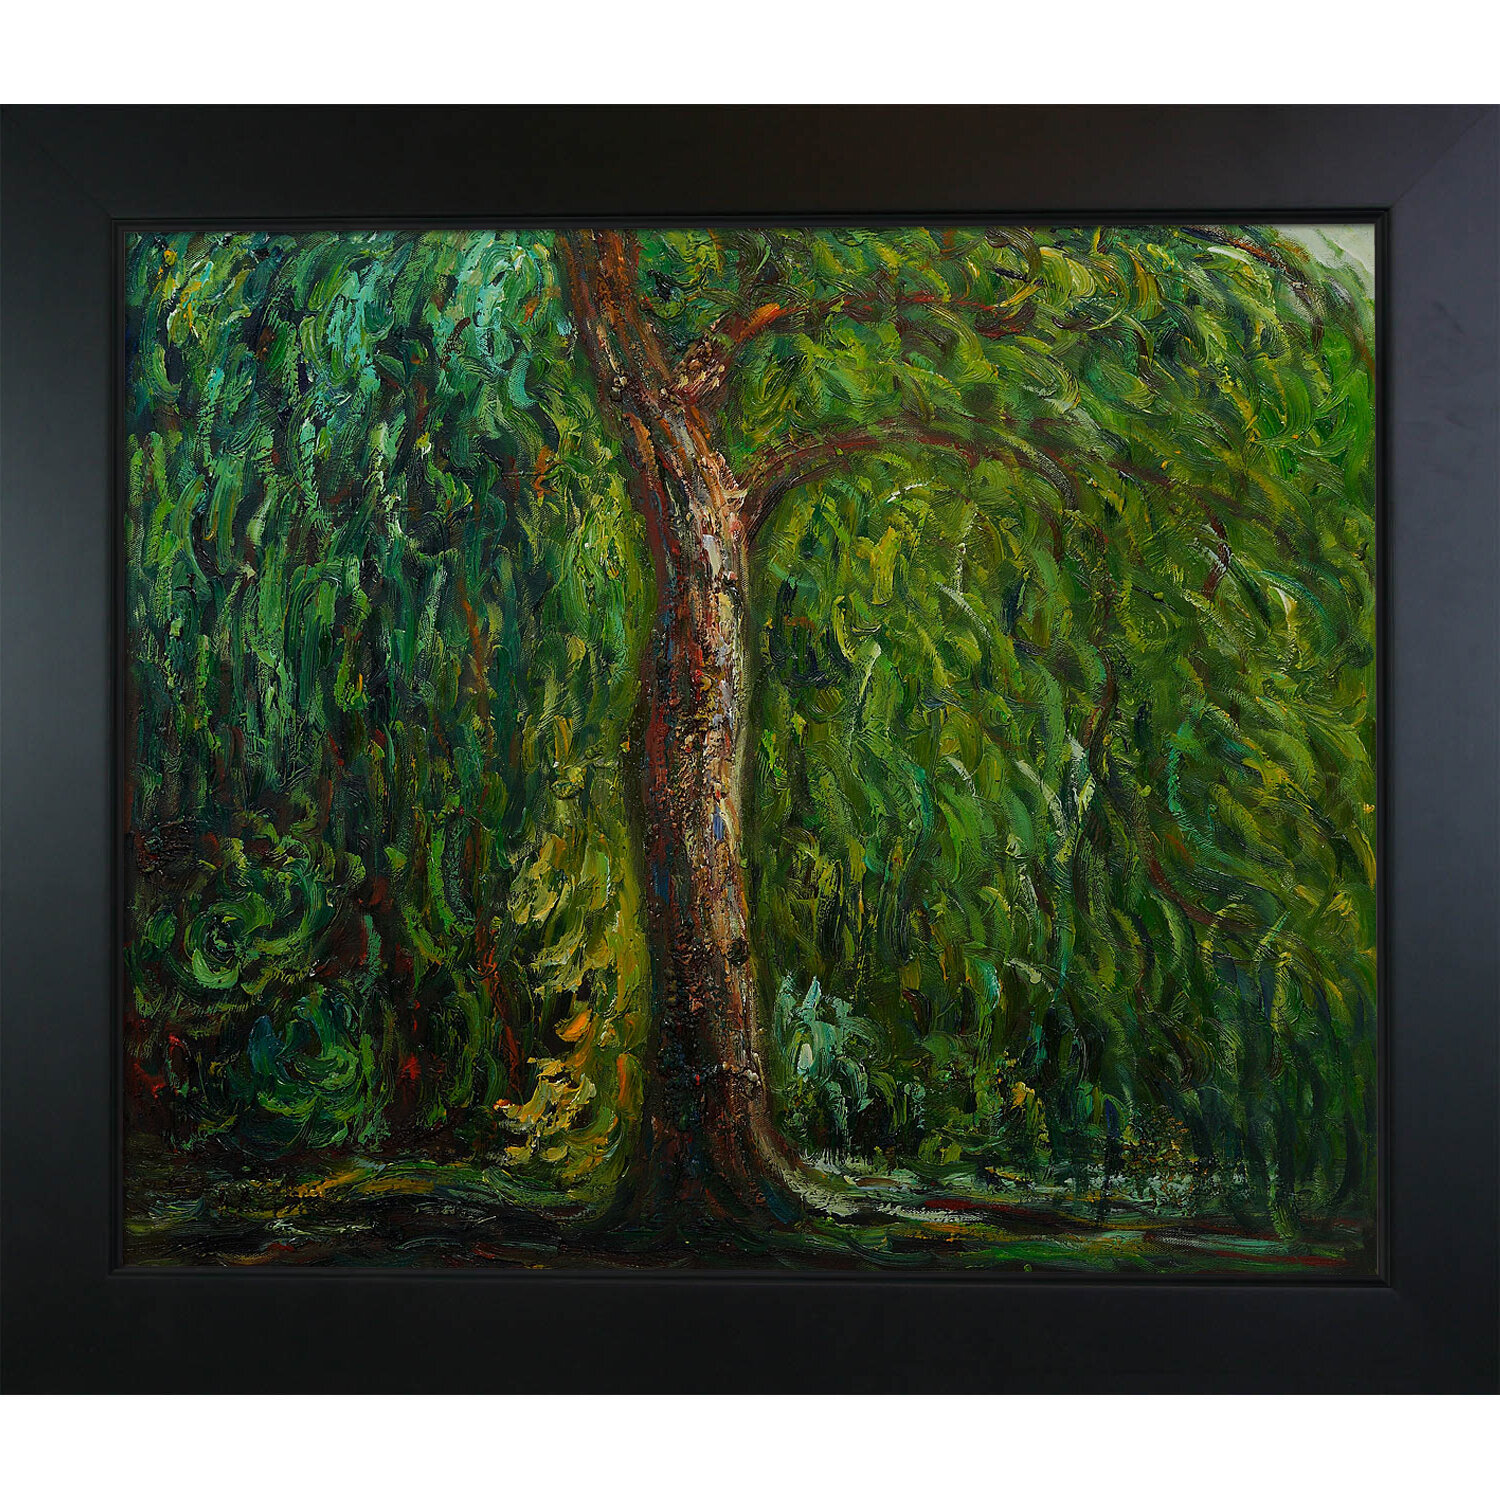 Wildon Home Weeping Willow By Claude Monet Framed Painting Wayfair,Easter Lillies